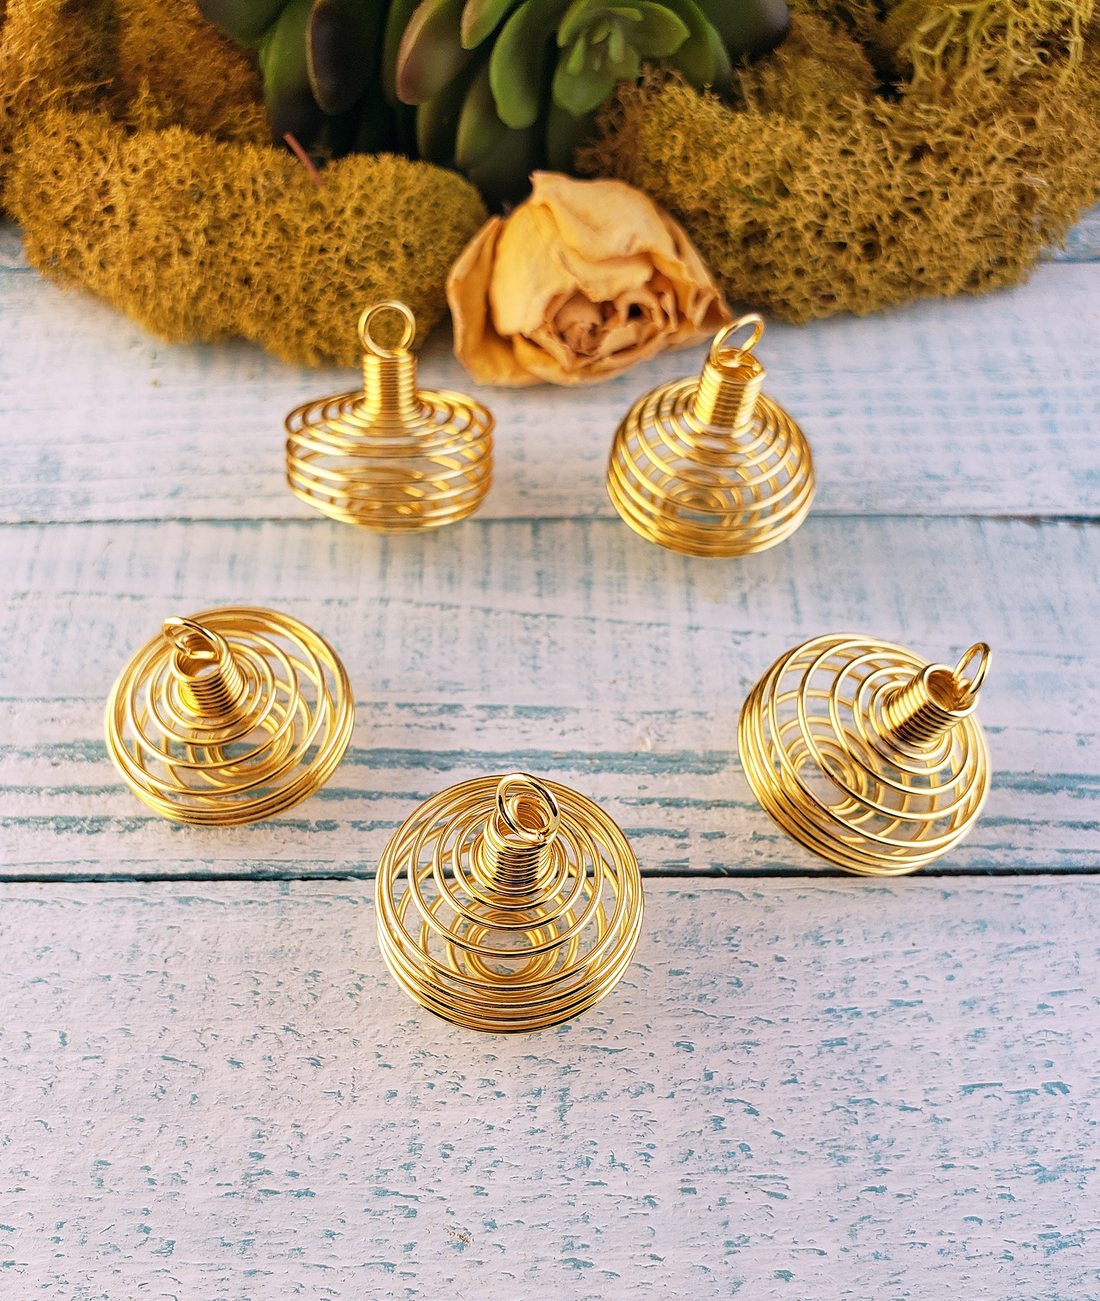 Gold-Colored Metal Spiral Cage Ornament Pendant - Perfect for Holding Gemstones or Orbs!